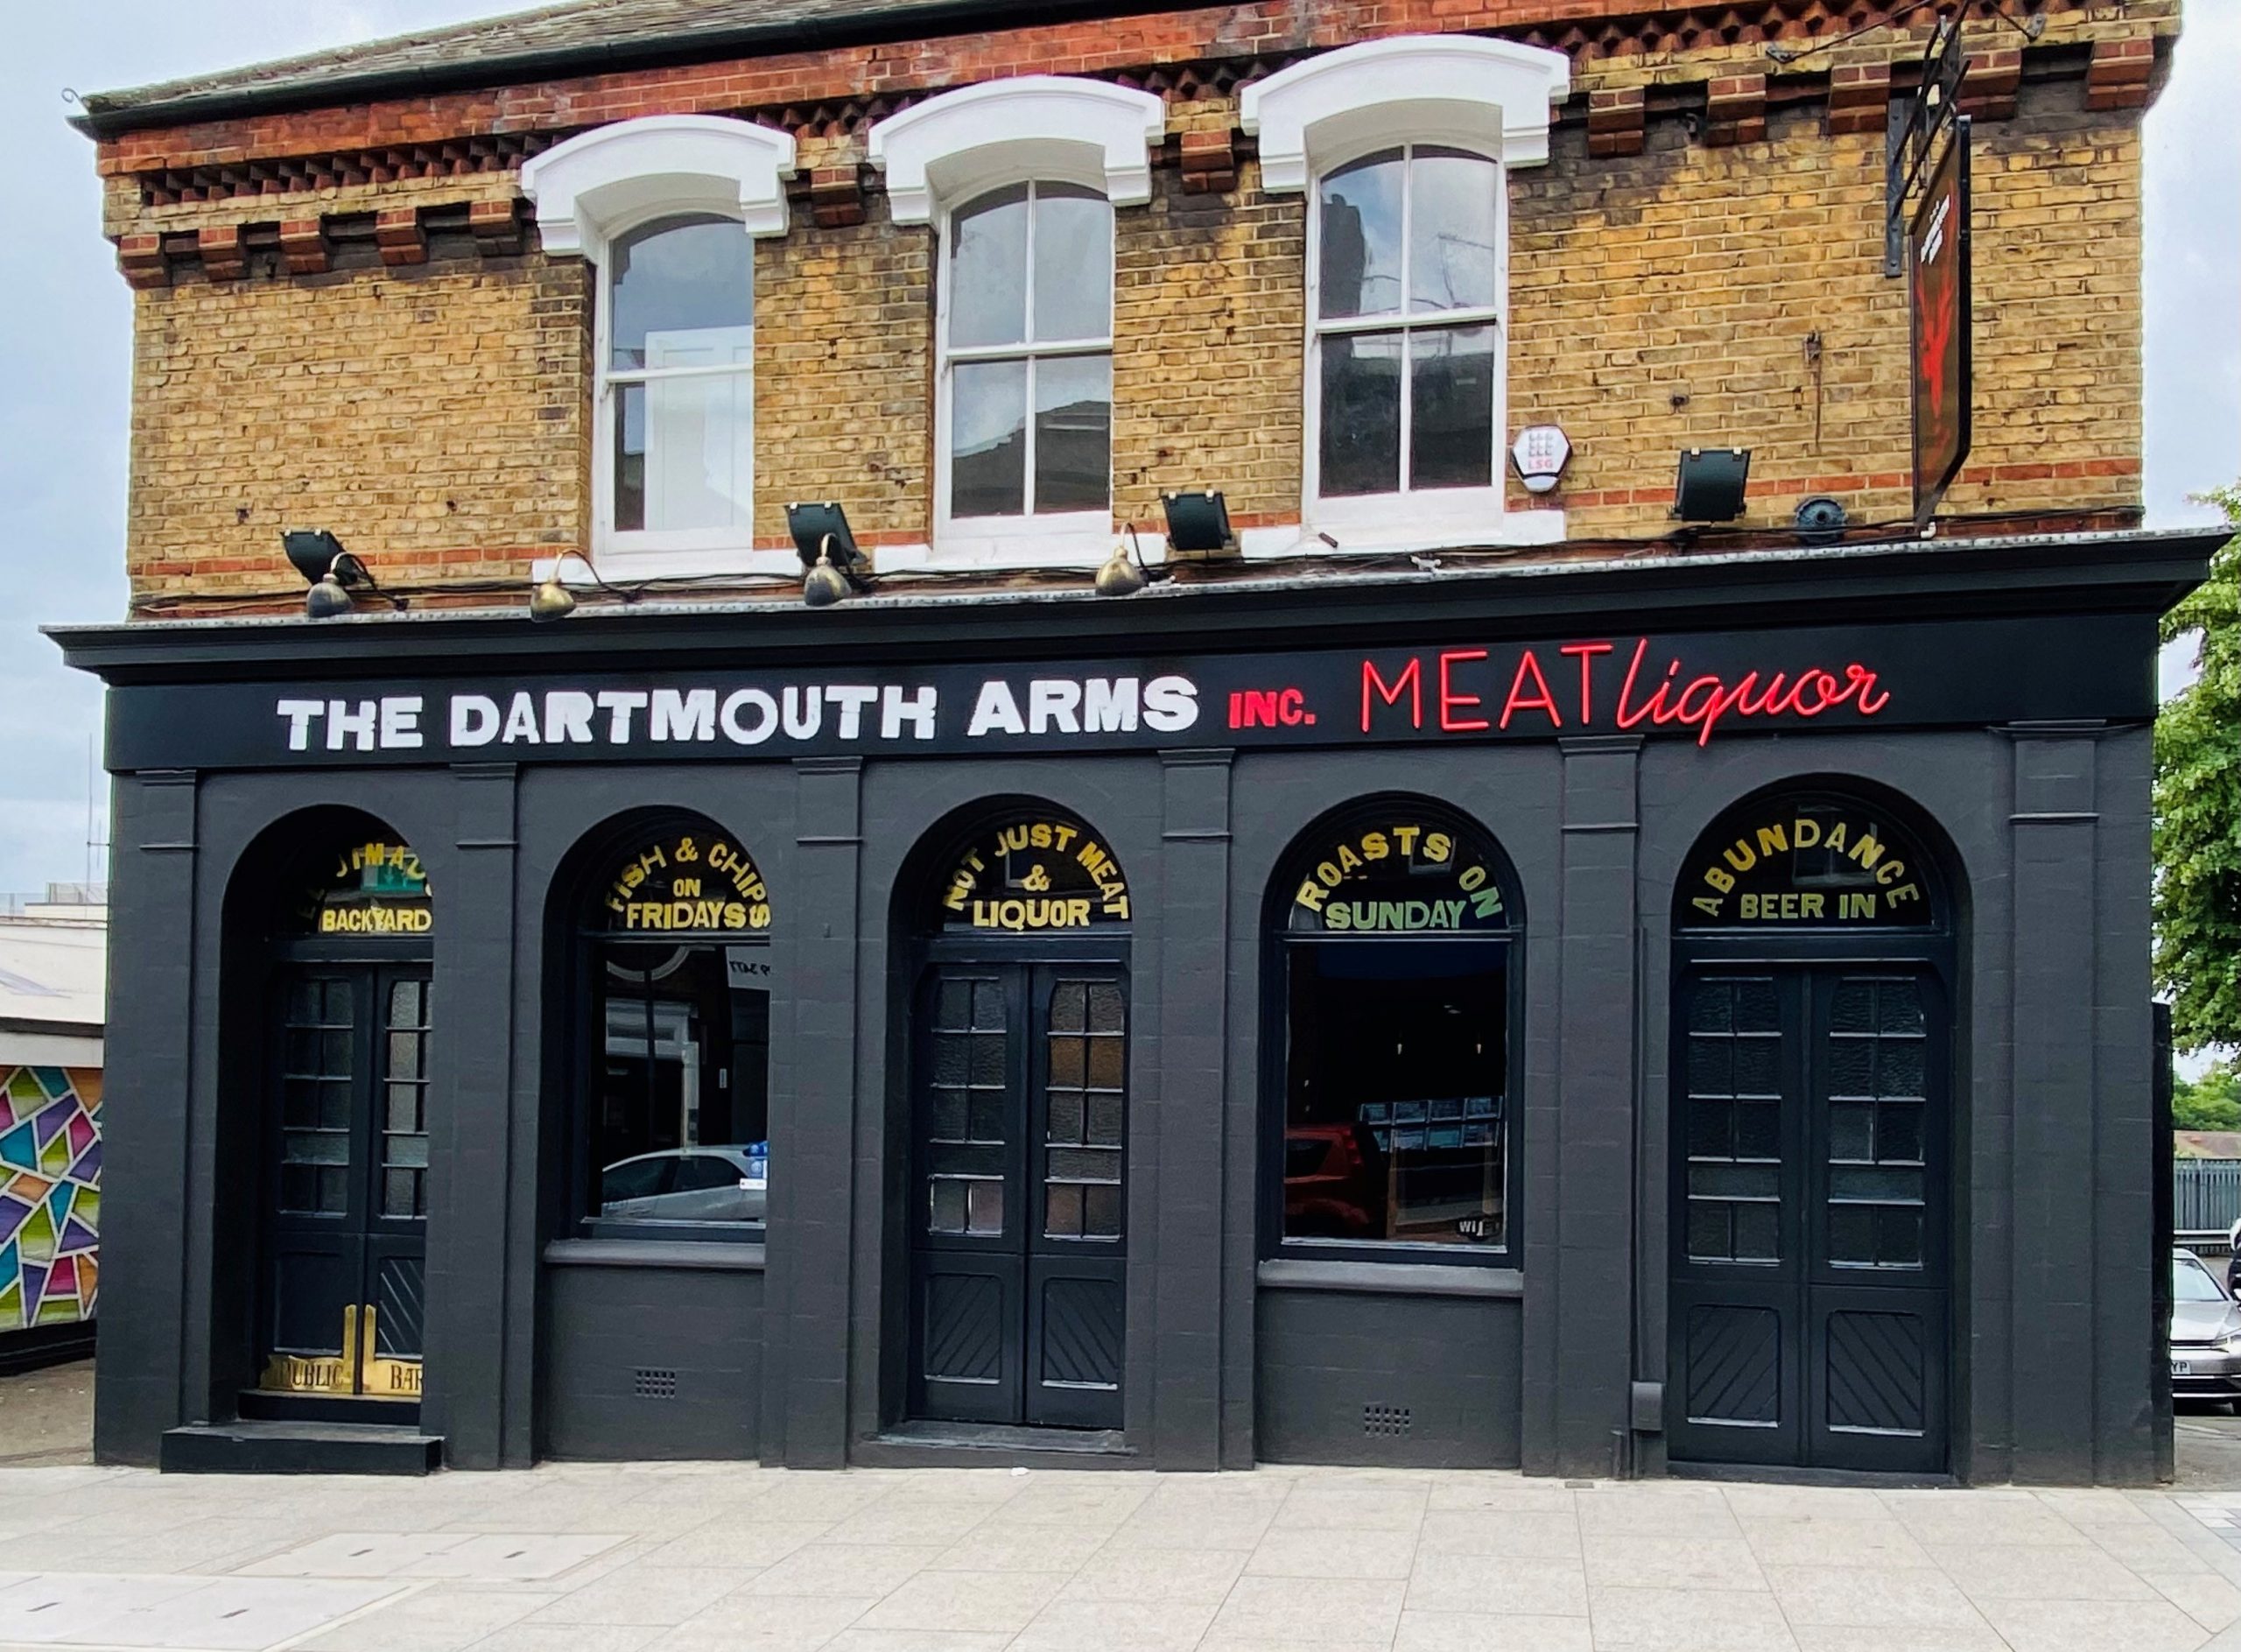 MEATLIQUOR-IFIED PUB CLASSICS, THE DARTMOUTH ARMS / FOREST HILL Image